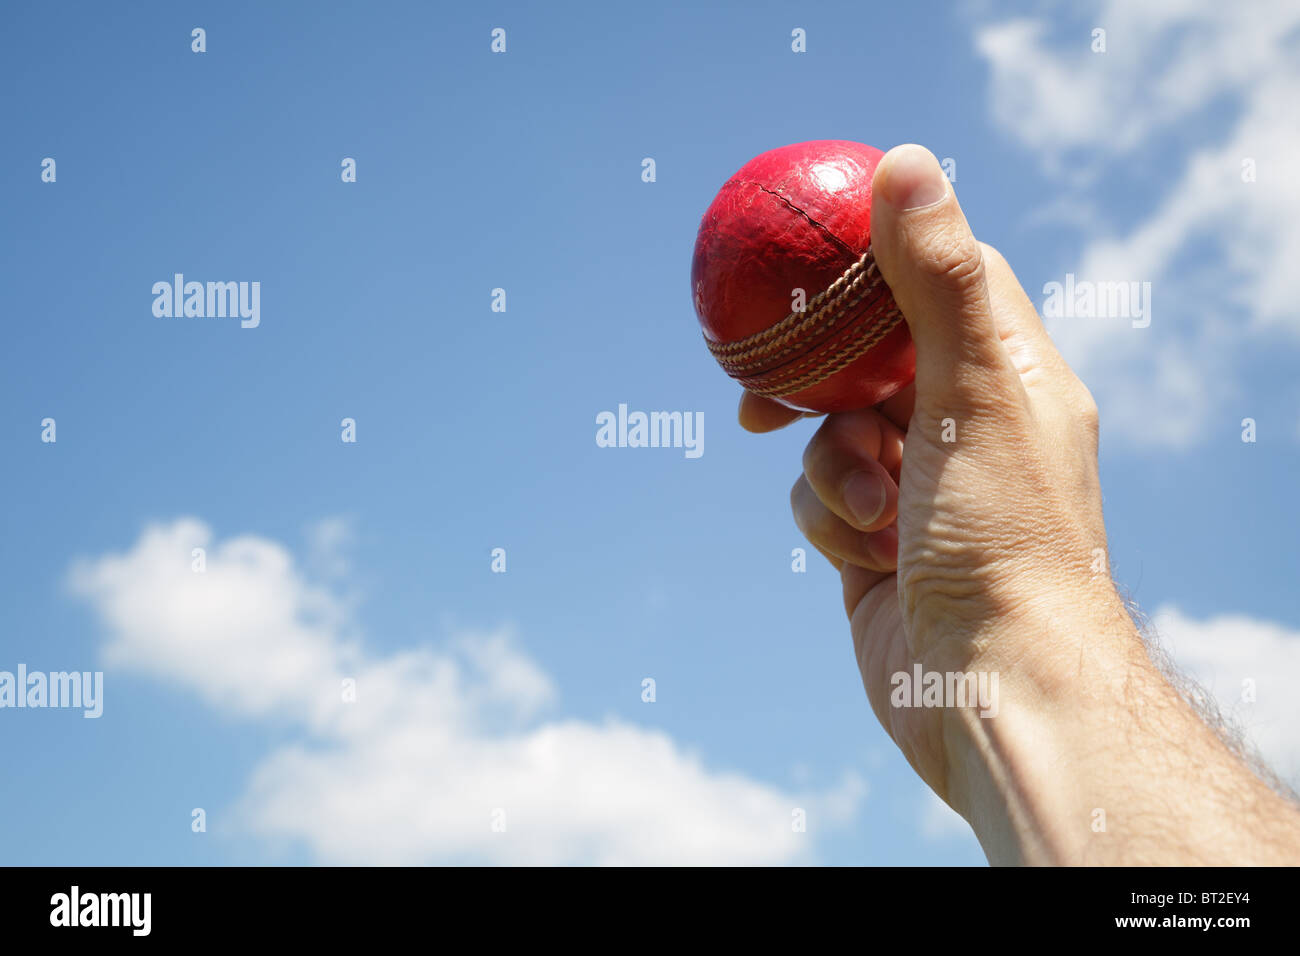 Cricket bowler with ball in hand Stock Photo